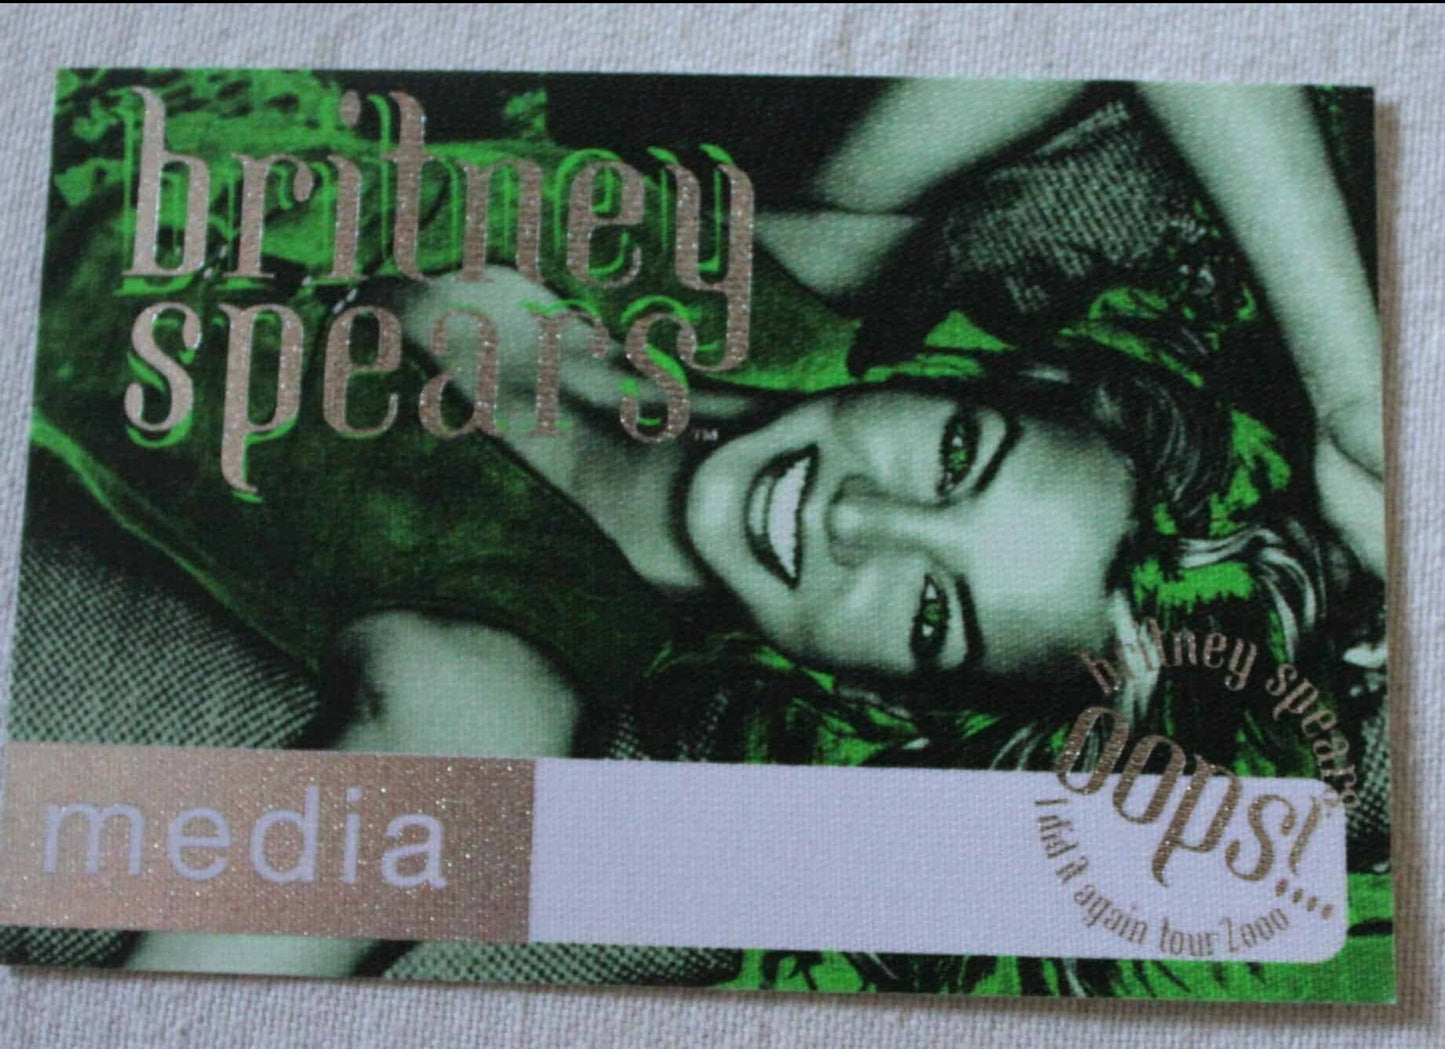 Backstage Pass, Britney Spears, Oops, I Did It Again Concert, 2000, Media Pass